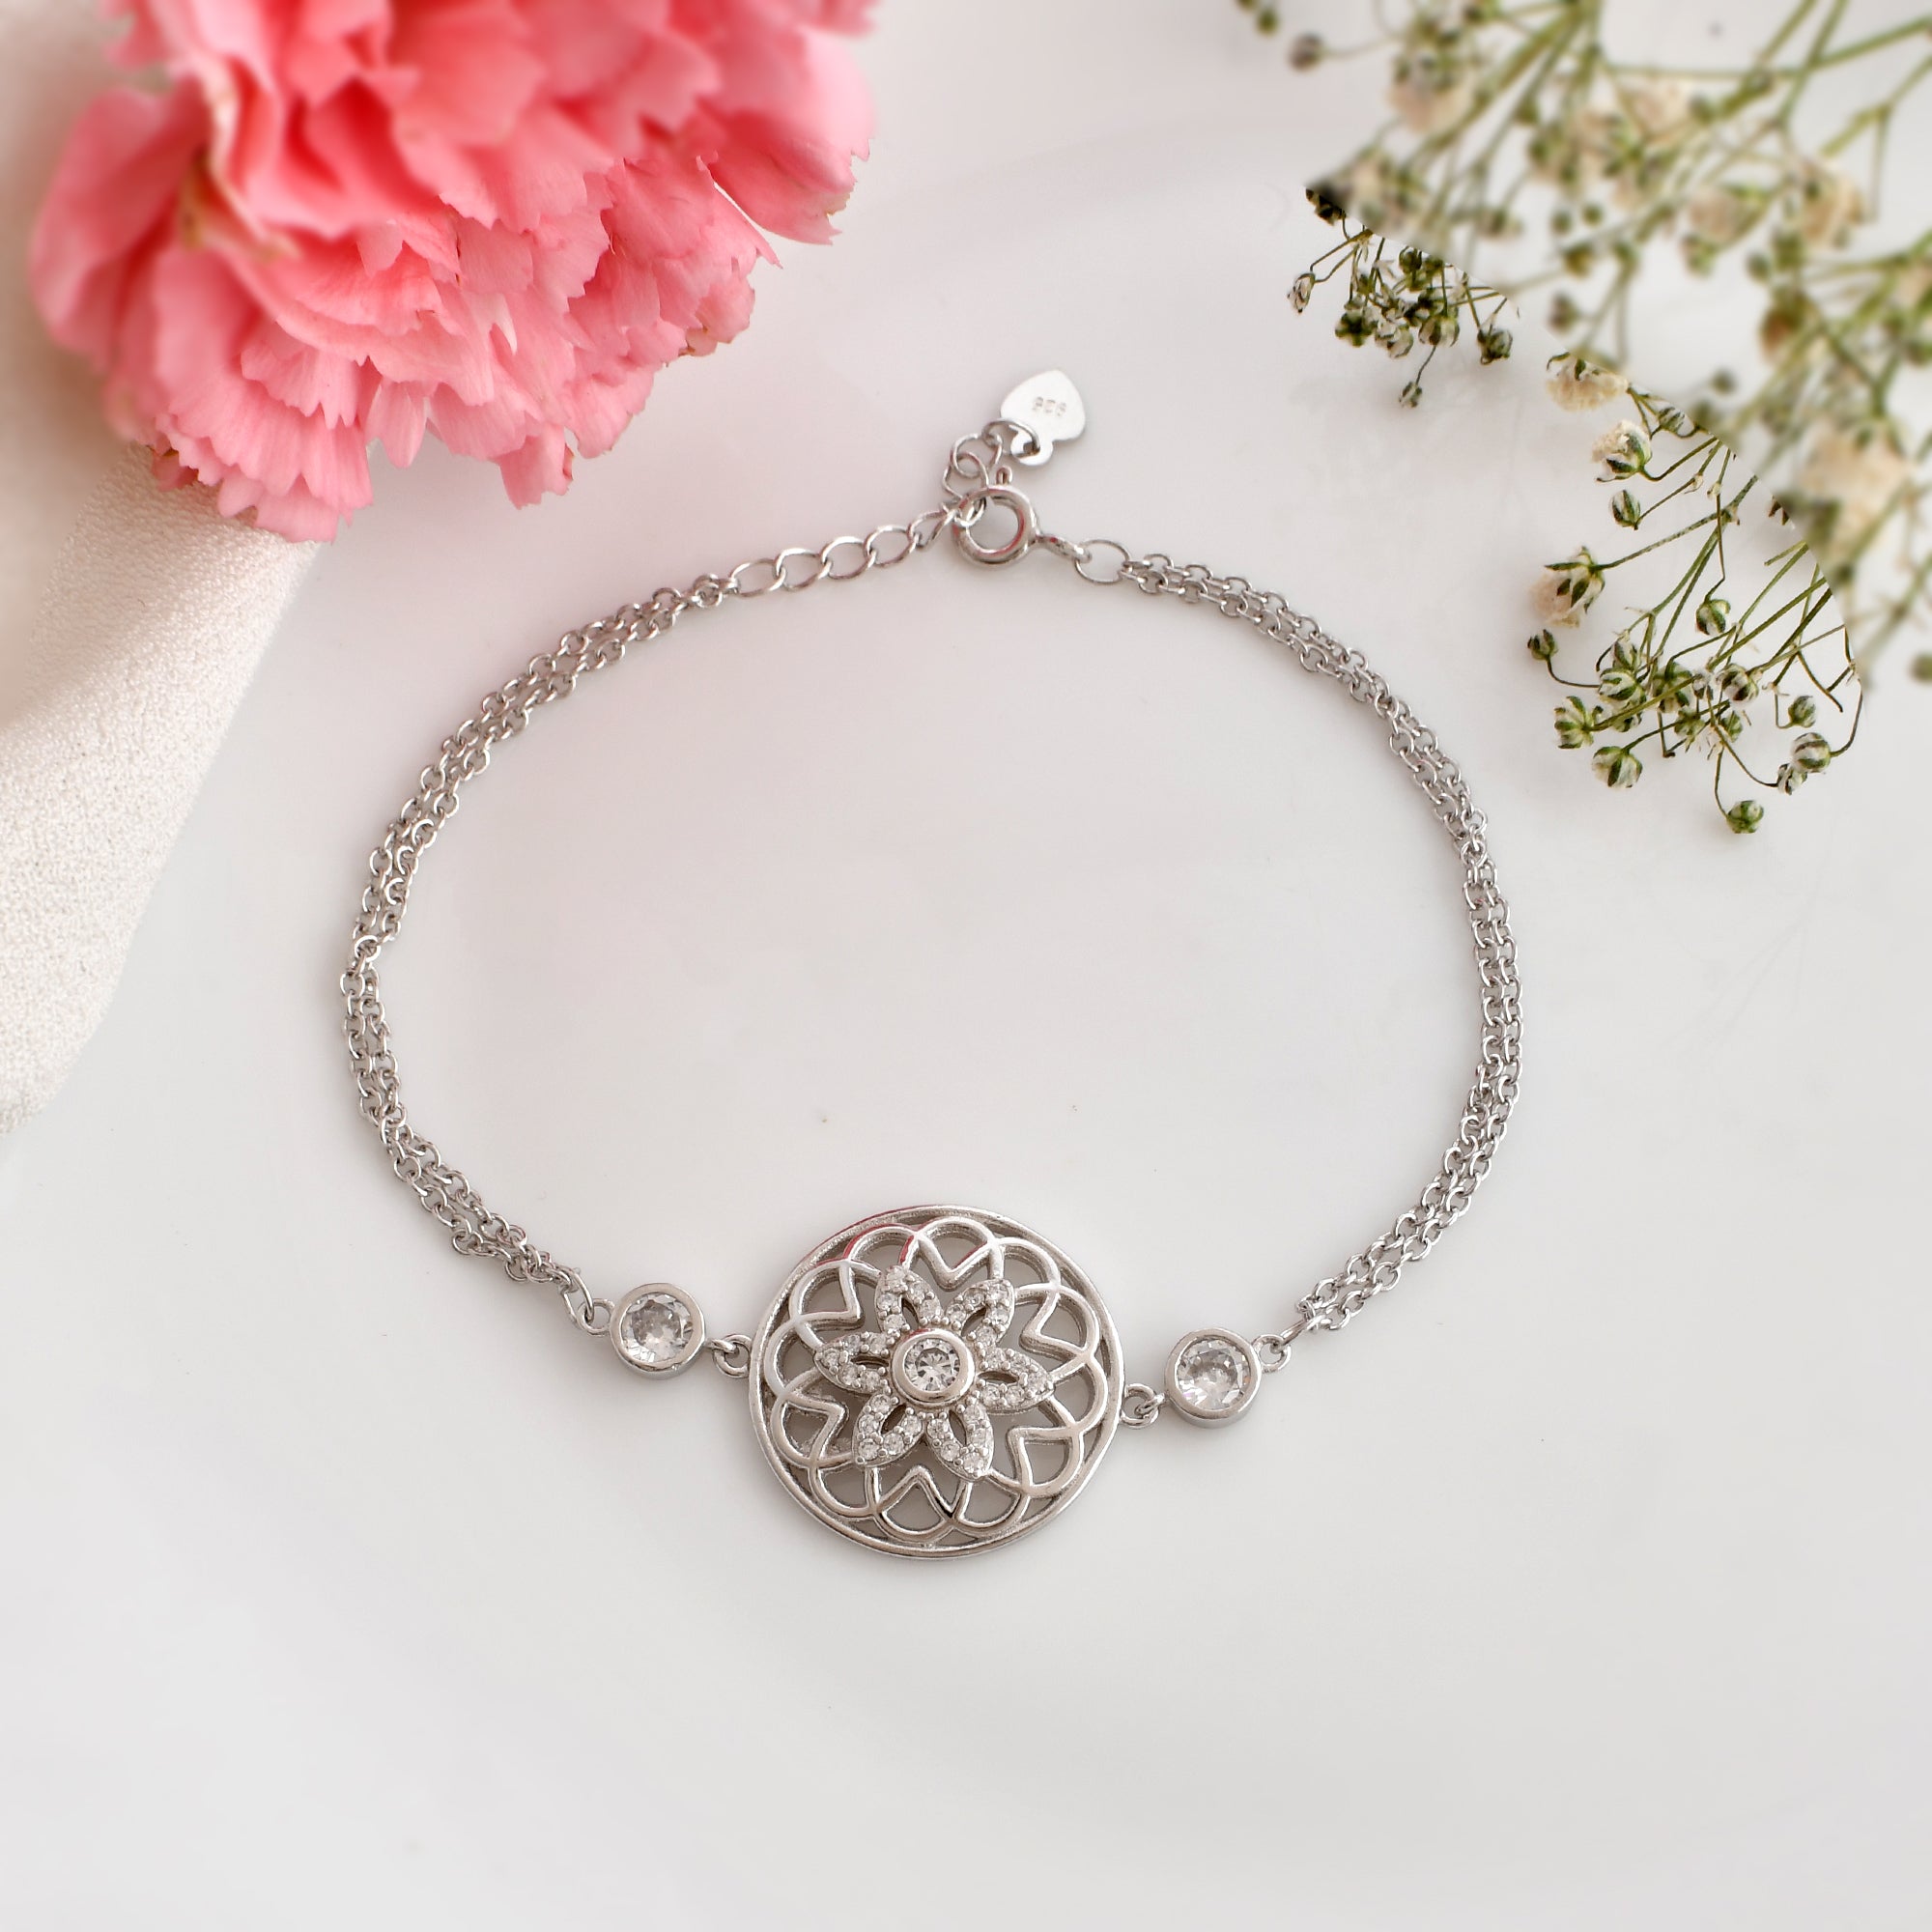 Geometric Zircon Tennis Bracelet Trendy 14K Gold Plated Design For Women  And Girls Korean Fashion Minimalist Jewelry With AAA ZIRcon Perfect Party  Gift From Konw_you_always, $4.59 | DHgate.Com